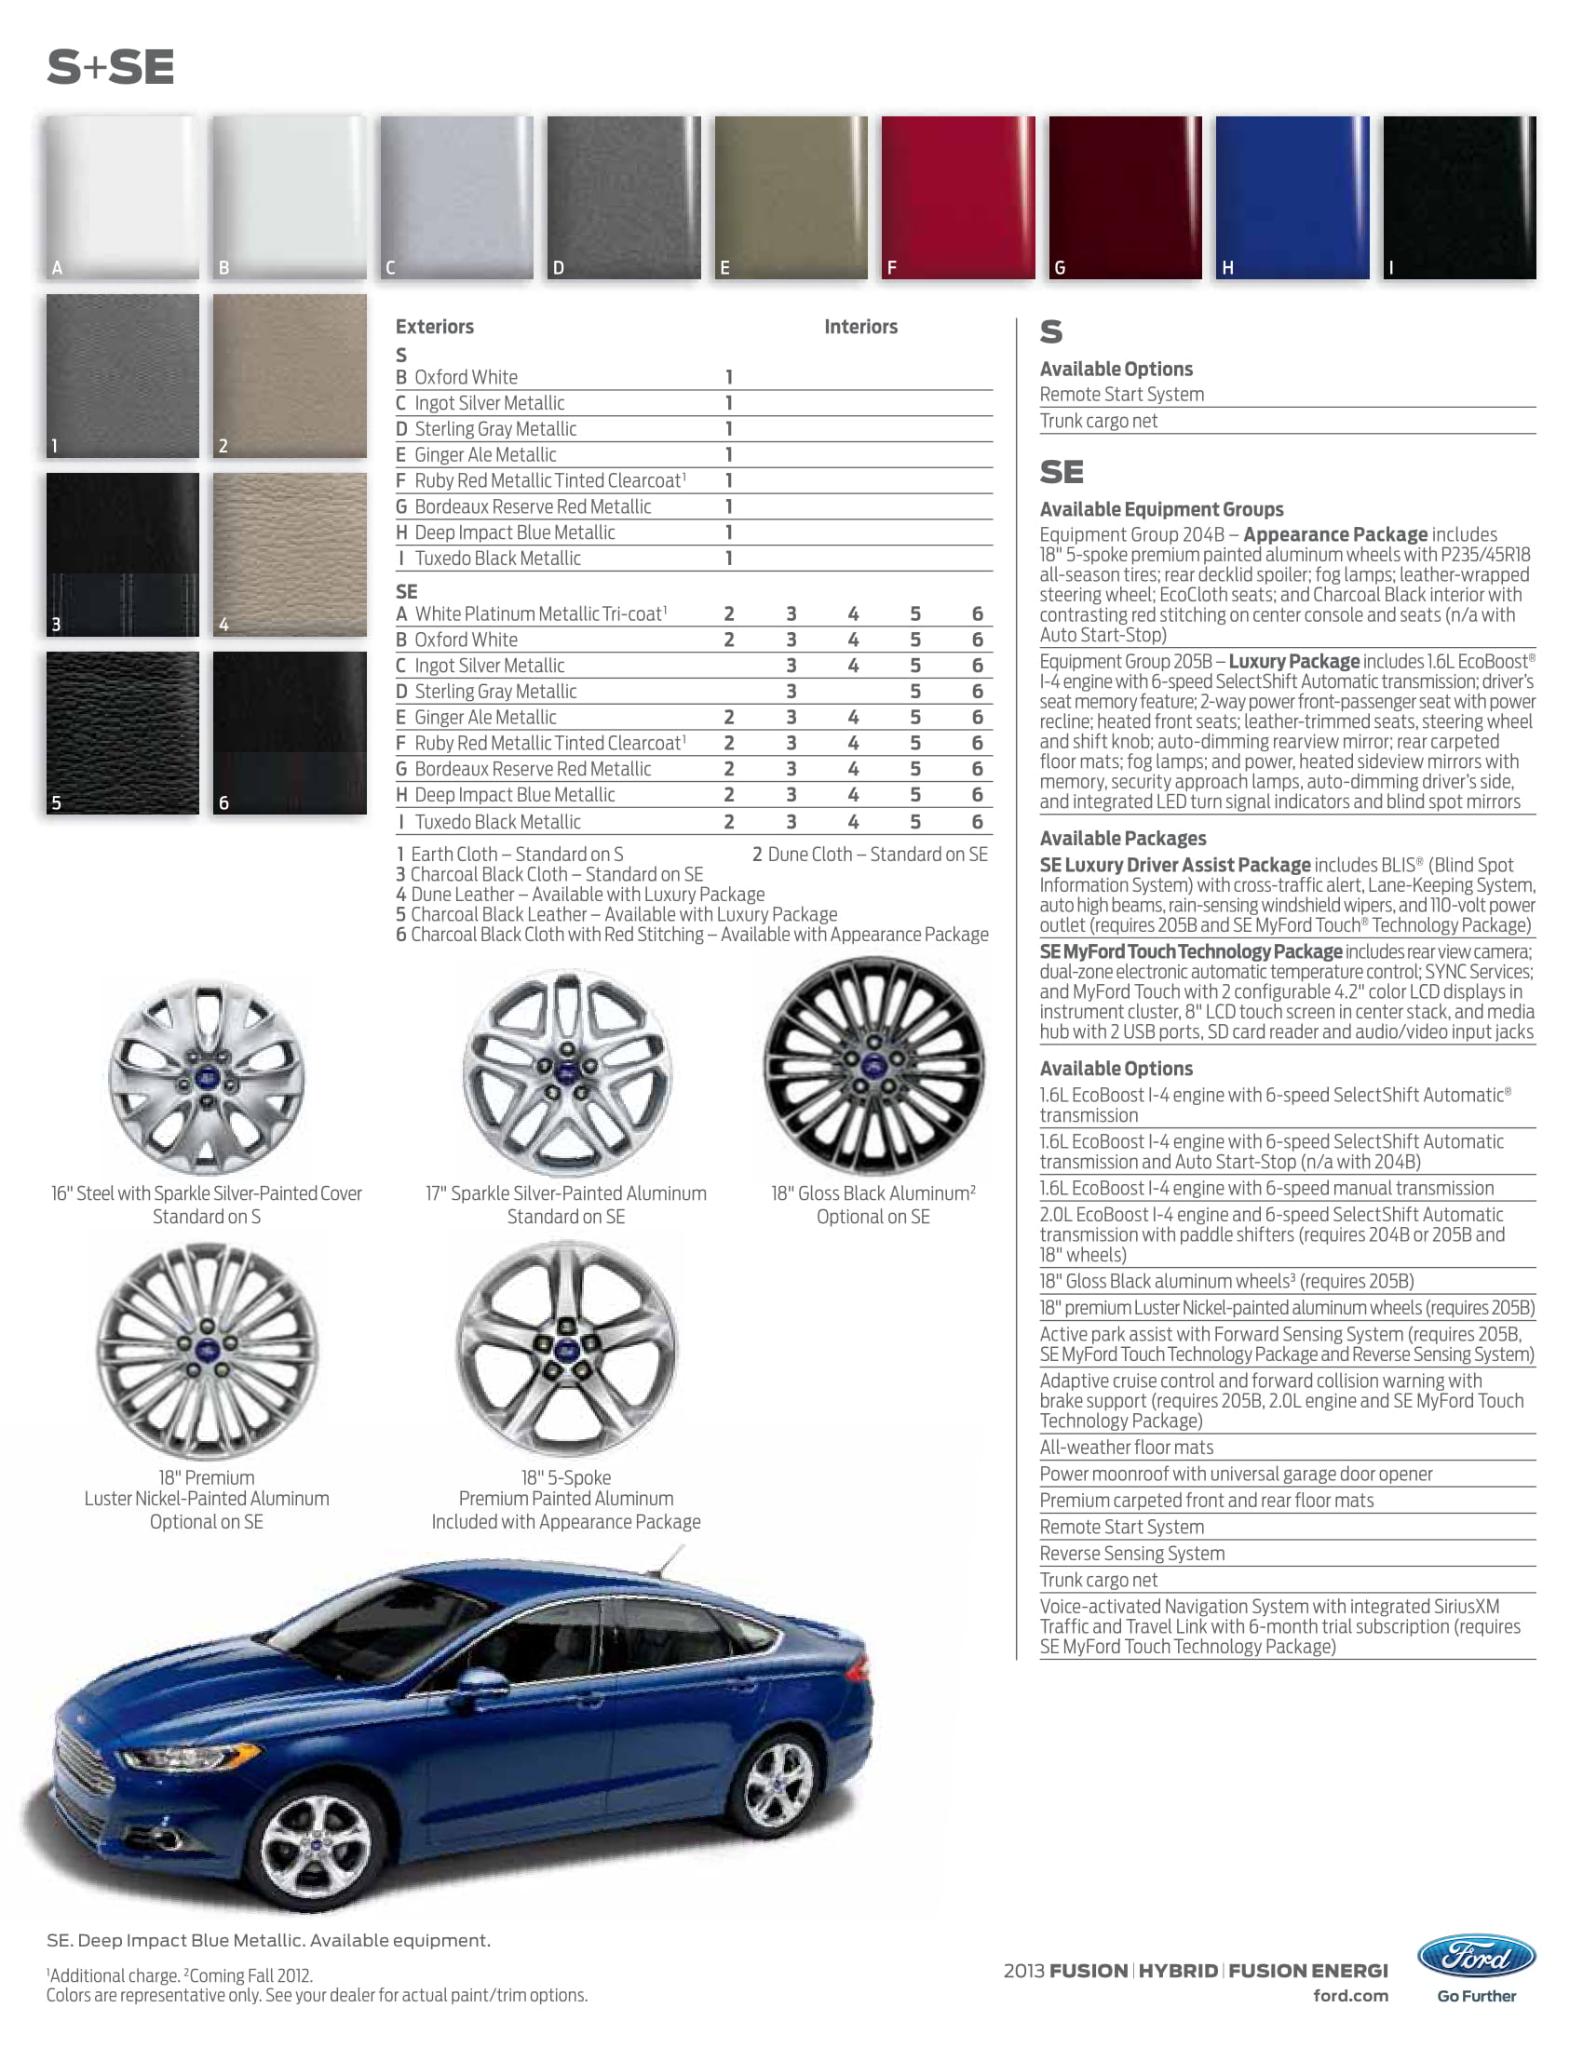 a photo showing the different color options the Ford Fusion came in.